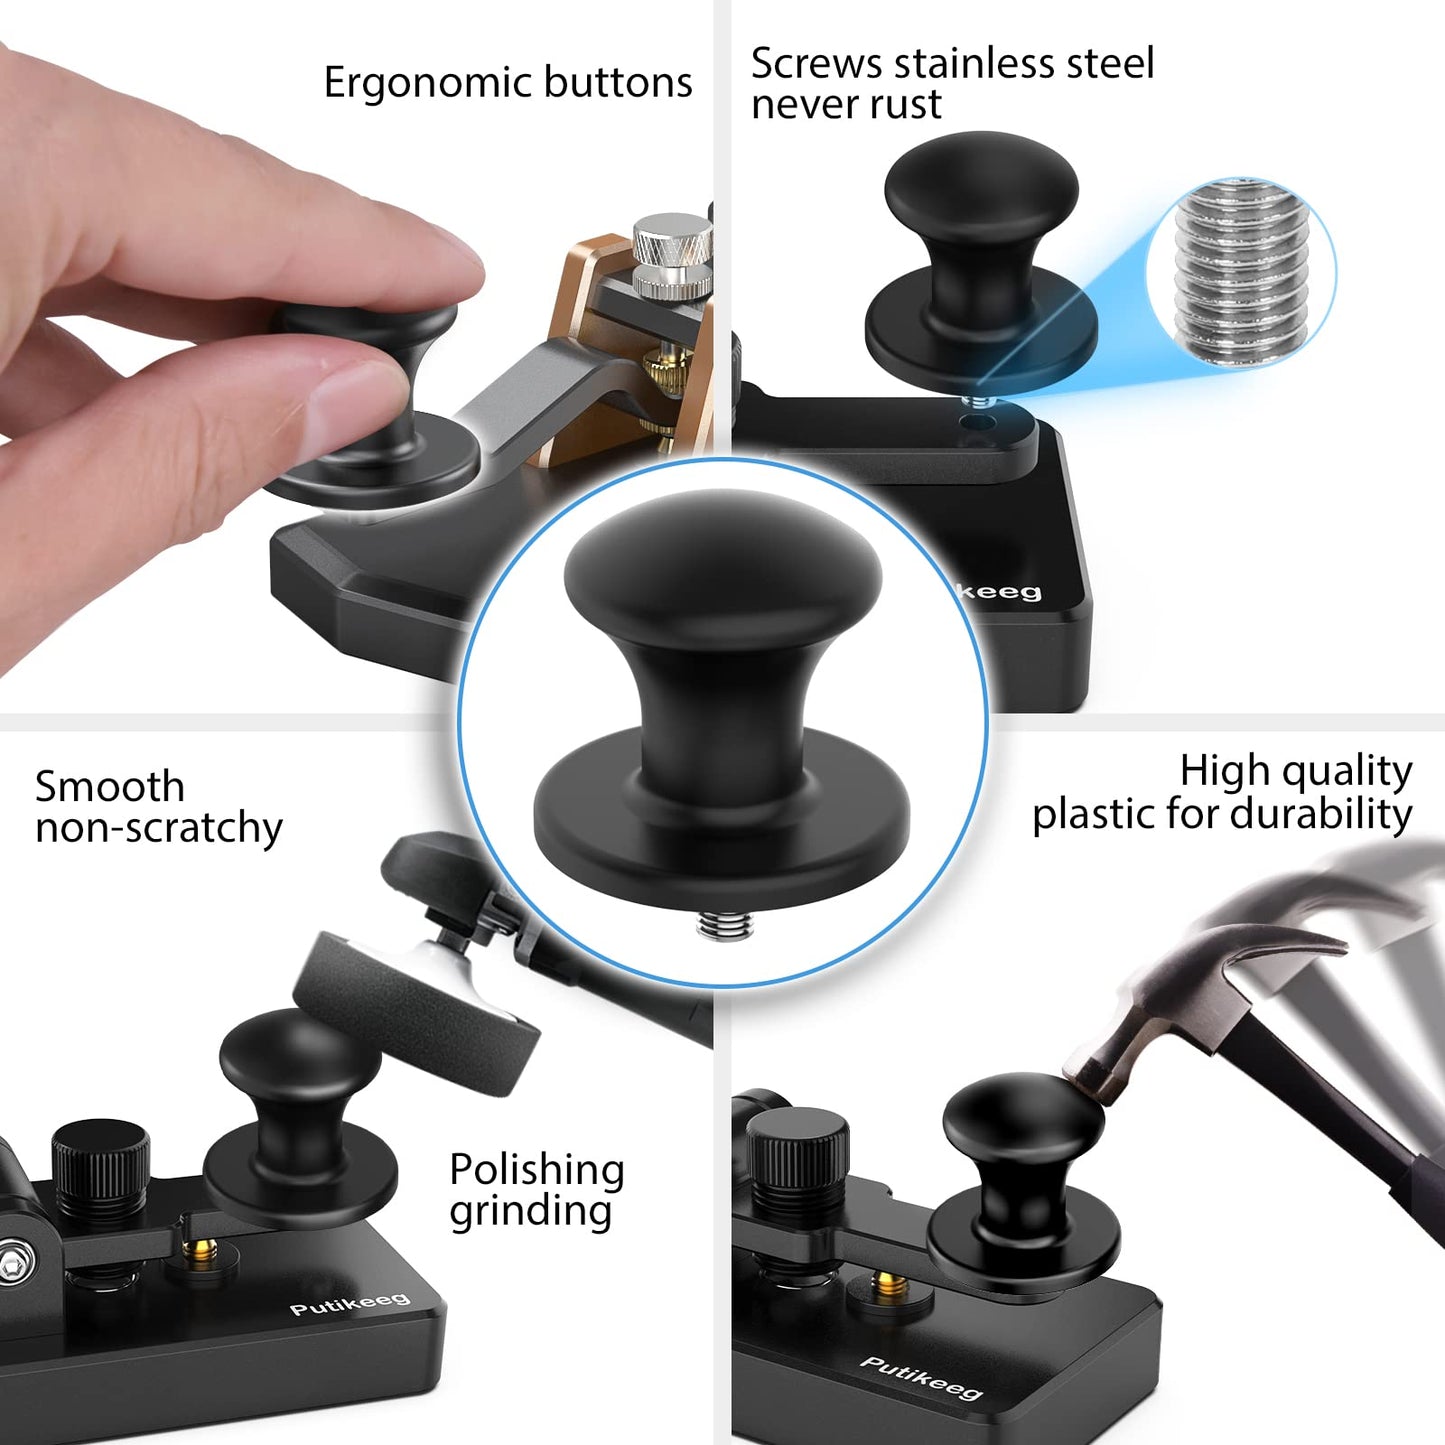 Upgrade your Putikeeg CW Straight Keys; with these replacement head accessories. Enhance your typing experience by improving responsiveness and durability. Easy to install, these buttons will elevate your typing game. This replacement head is compatible with PUTIKEEG most straight key.